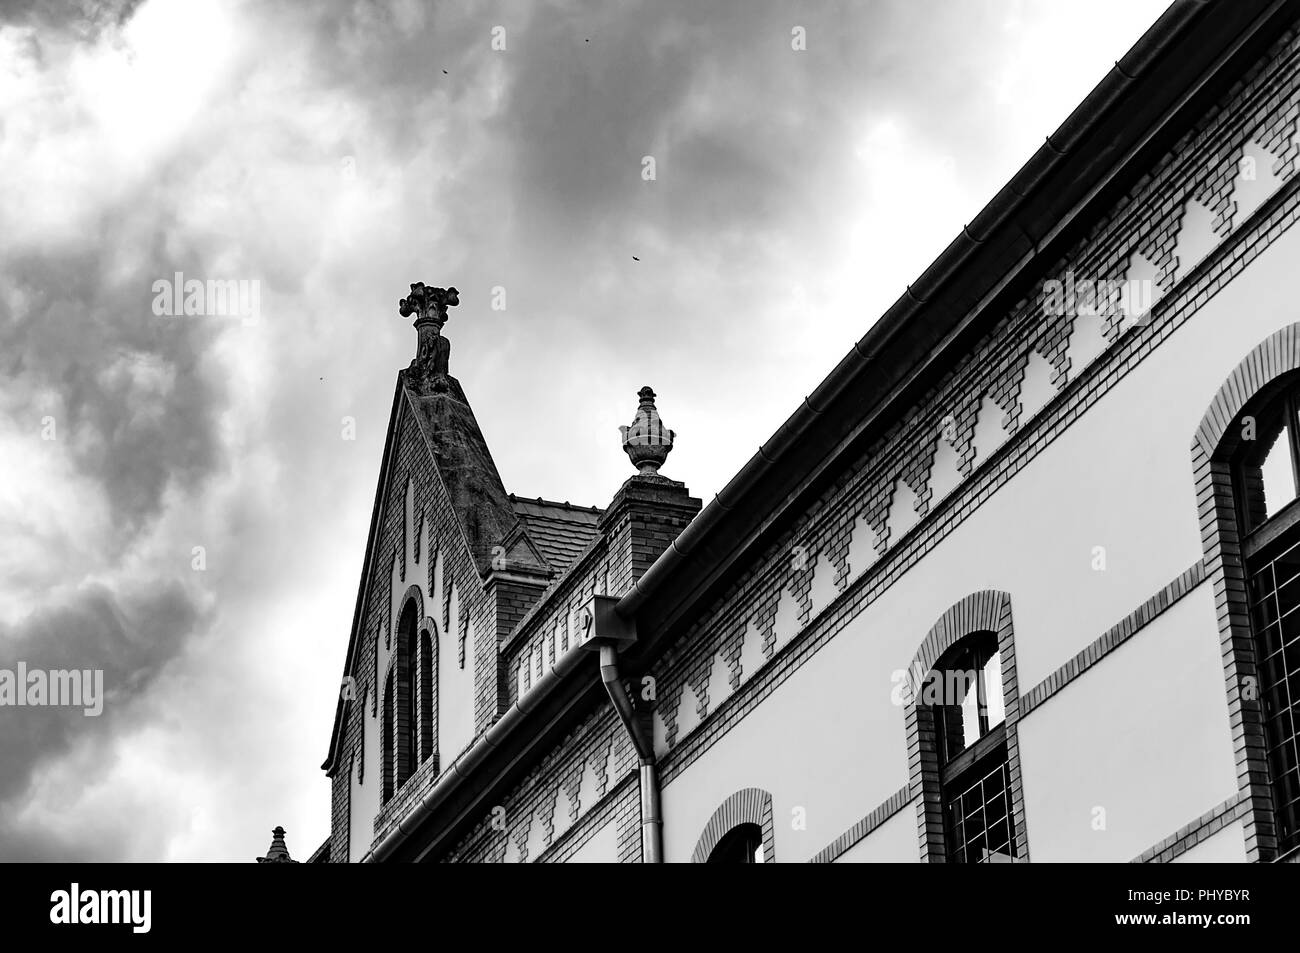 Black and white photo of the historic architecture in Eger, Hungary, Europe on a cloudy, stormy day. Stock Photo